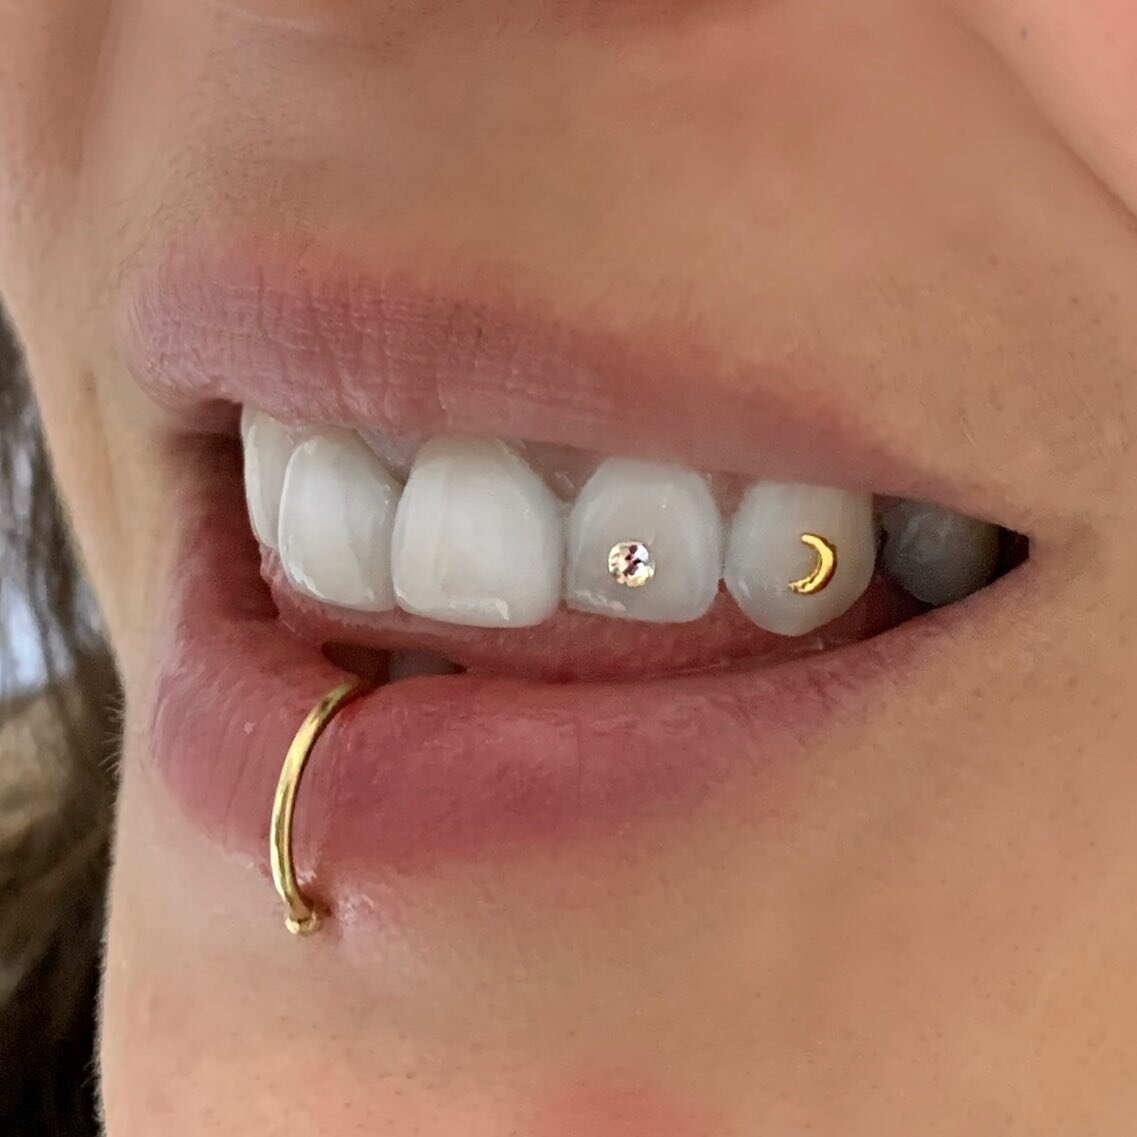 Tooth 👏🏻 jewelry 👏🏻 is 👏🏻 back! Swarovski crystals are $50 or 2 for $80. Gold charms are $120. Book an appointment online or come in to see our tooth jewelry selection ✨ all colors and sizes of genuine Swarovski crystals 💎 selection of gold ch